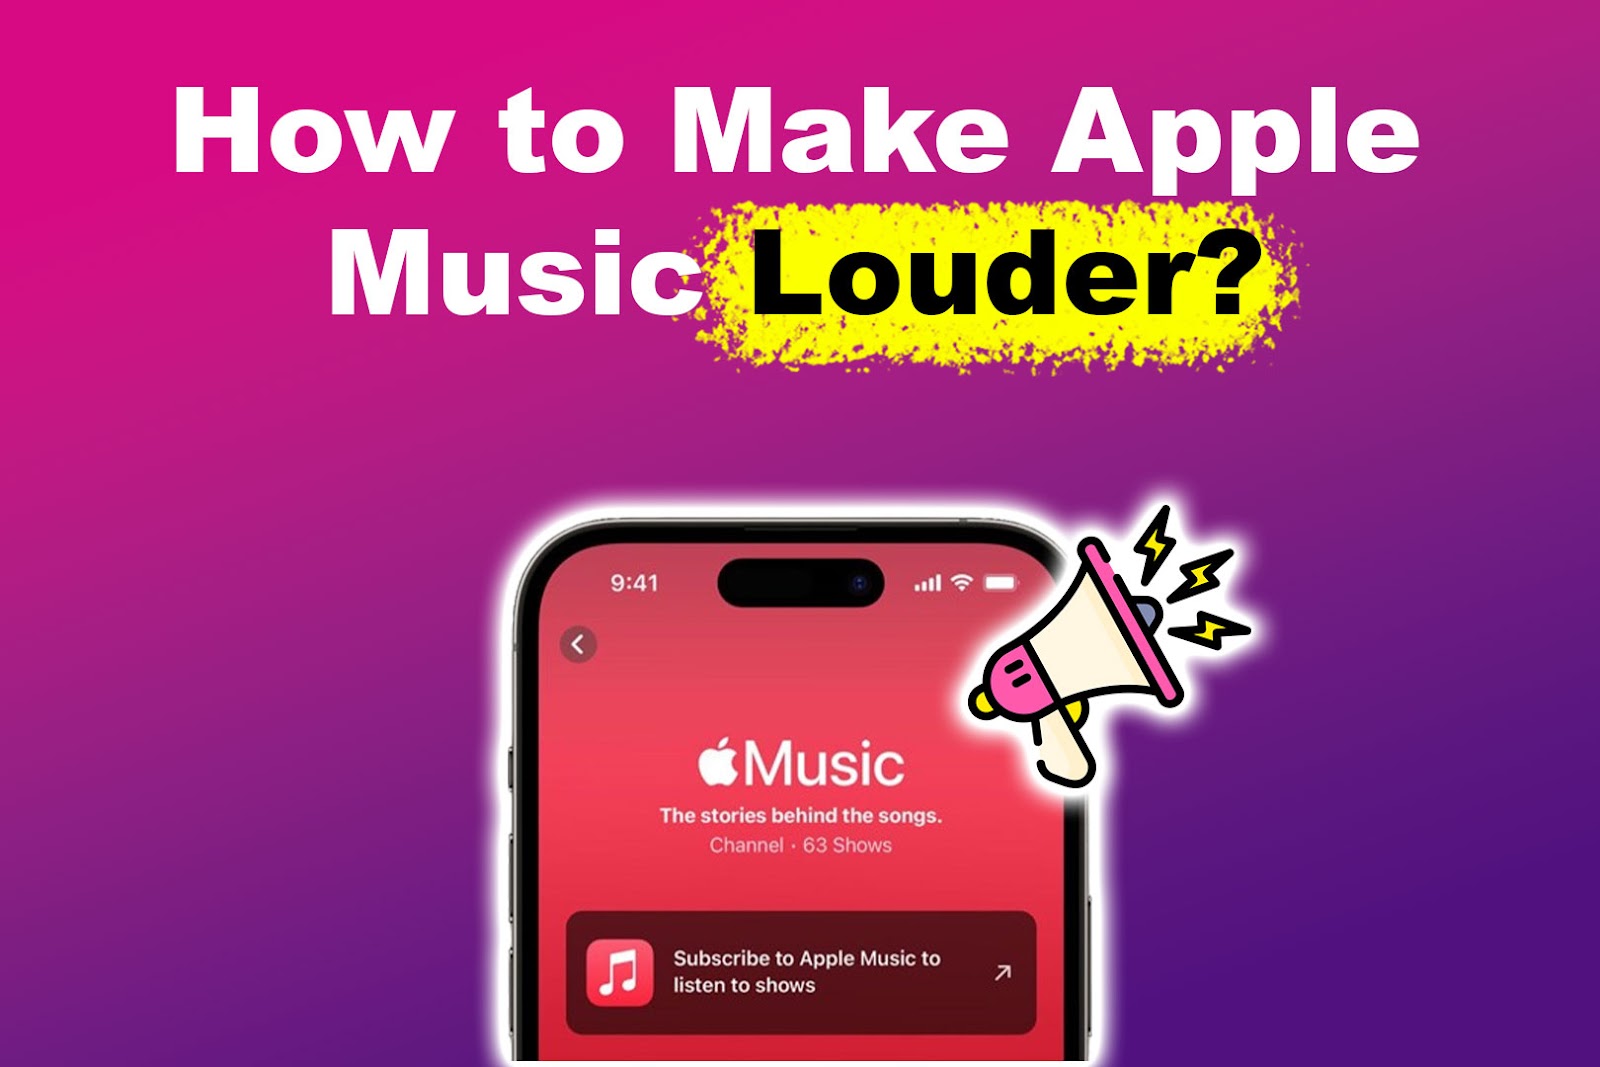 How to Make Apple Music Louder